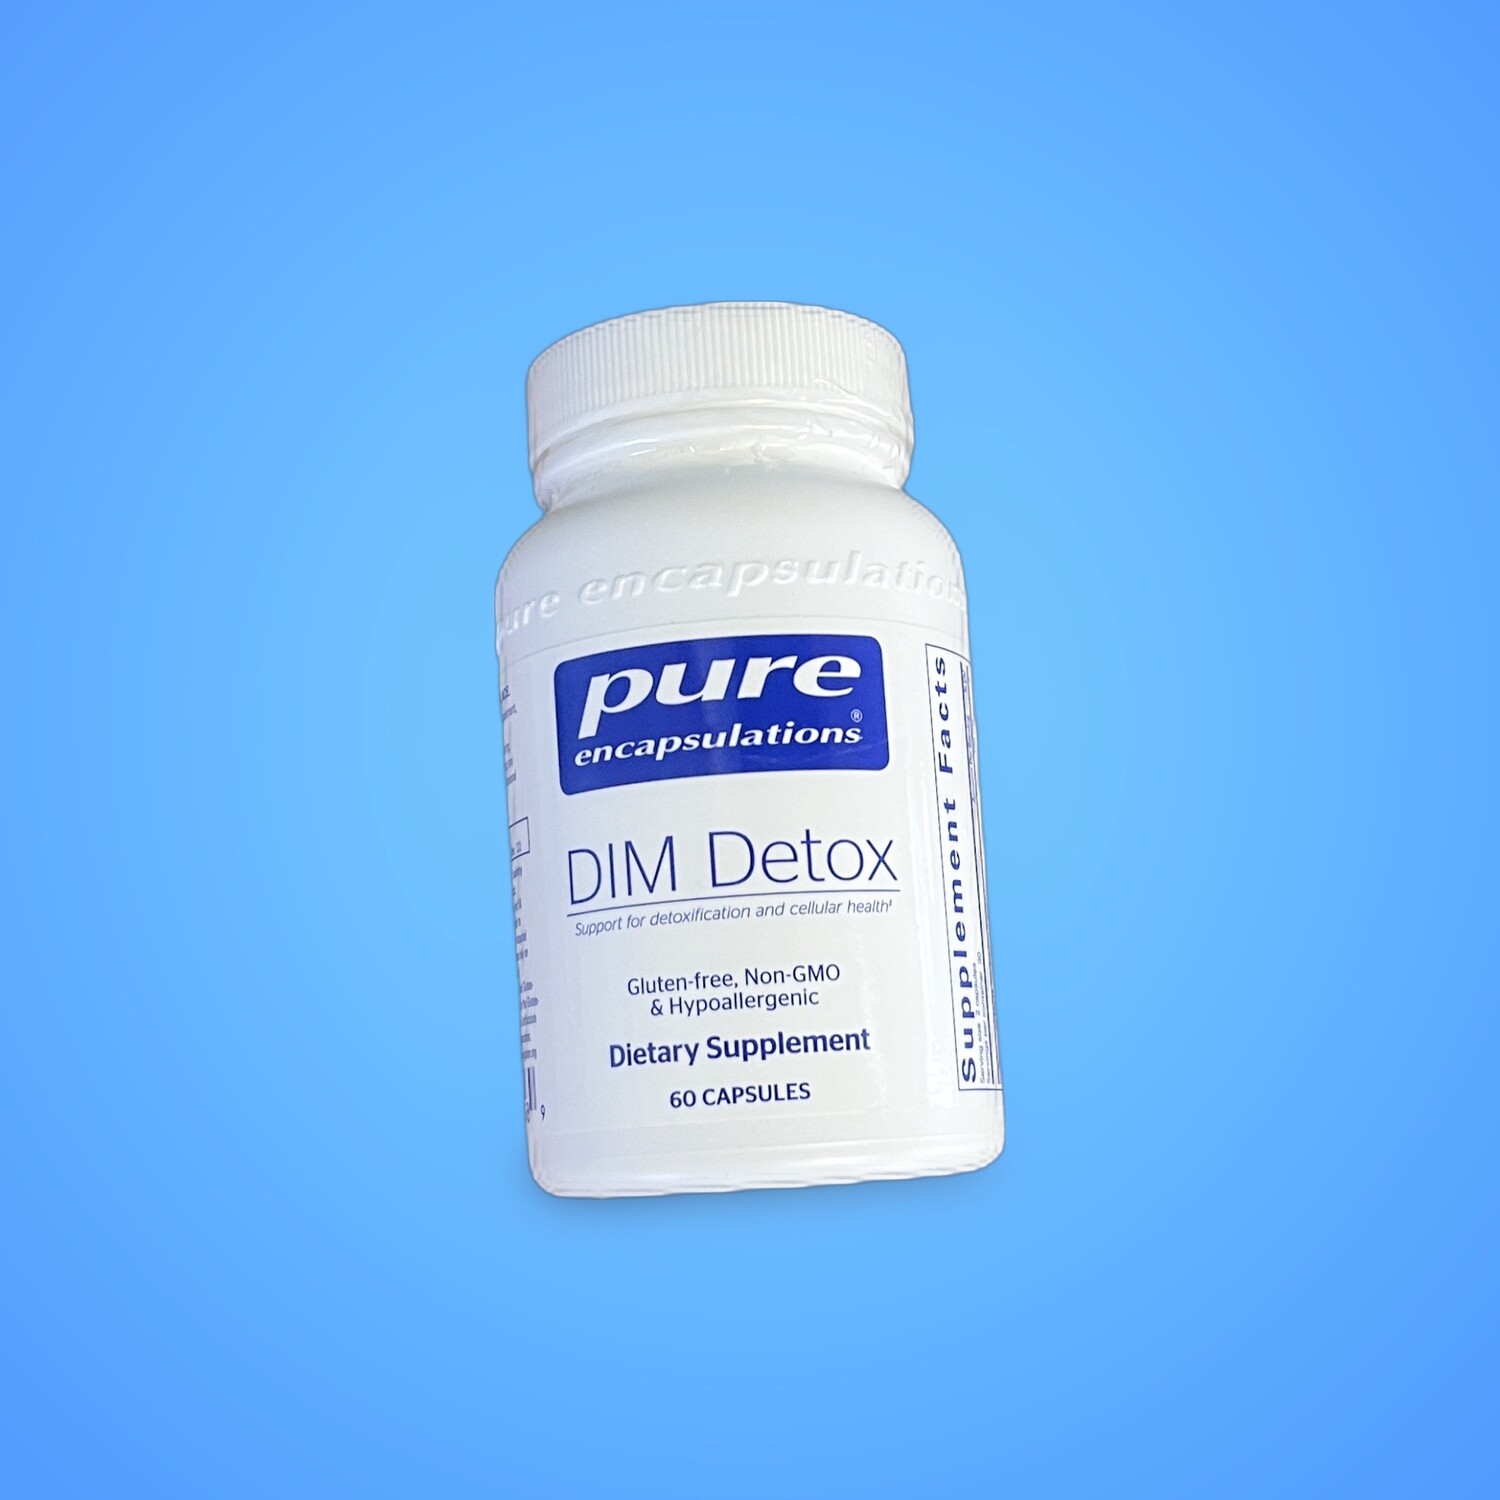 Pure Encapsulations - Dim Detox - Supplement Support for Detoxification and Cellular Health*